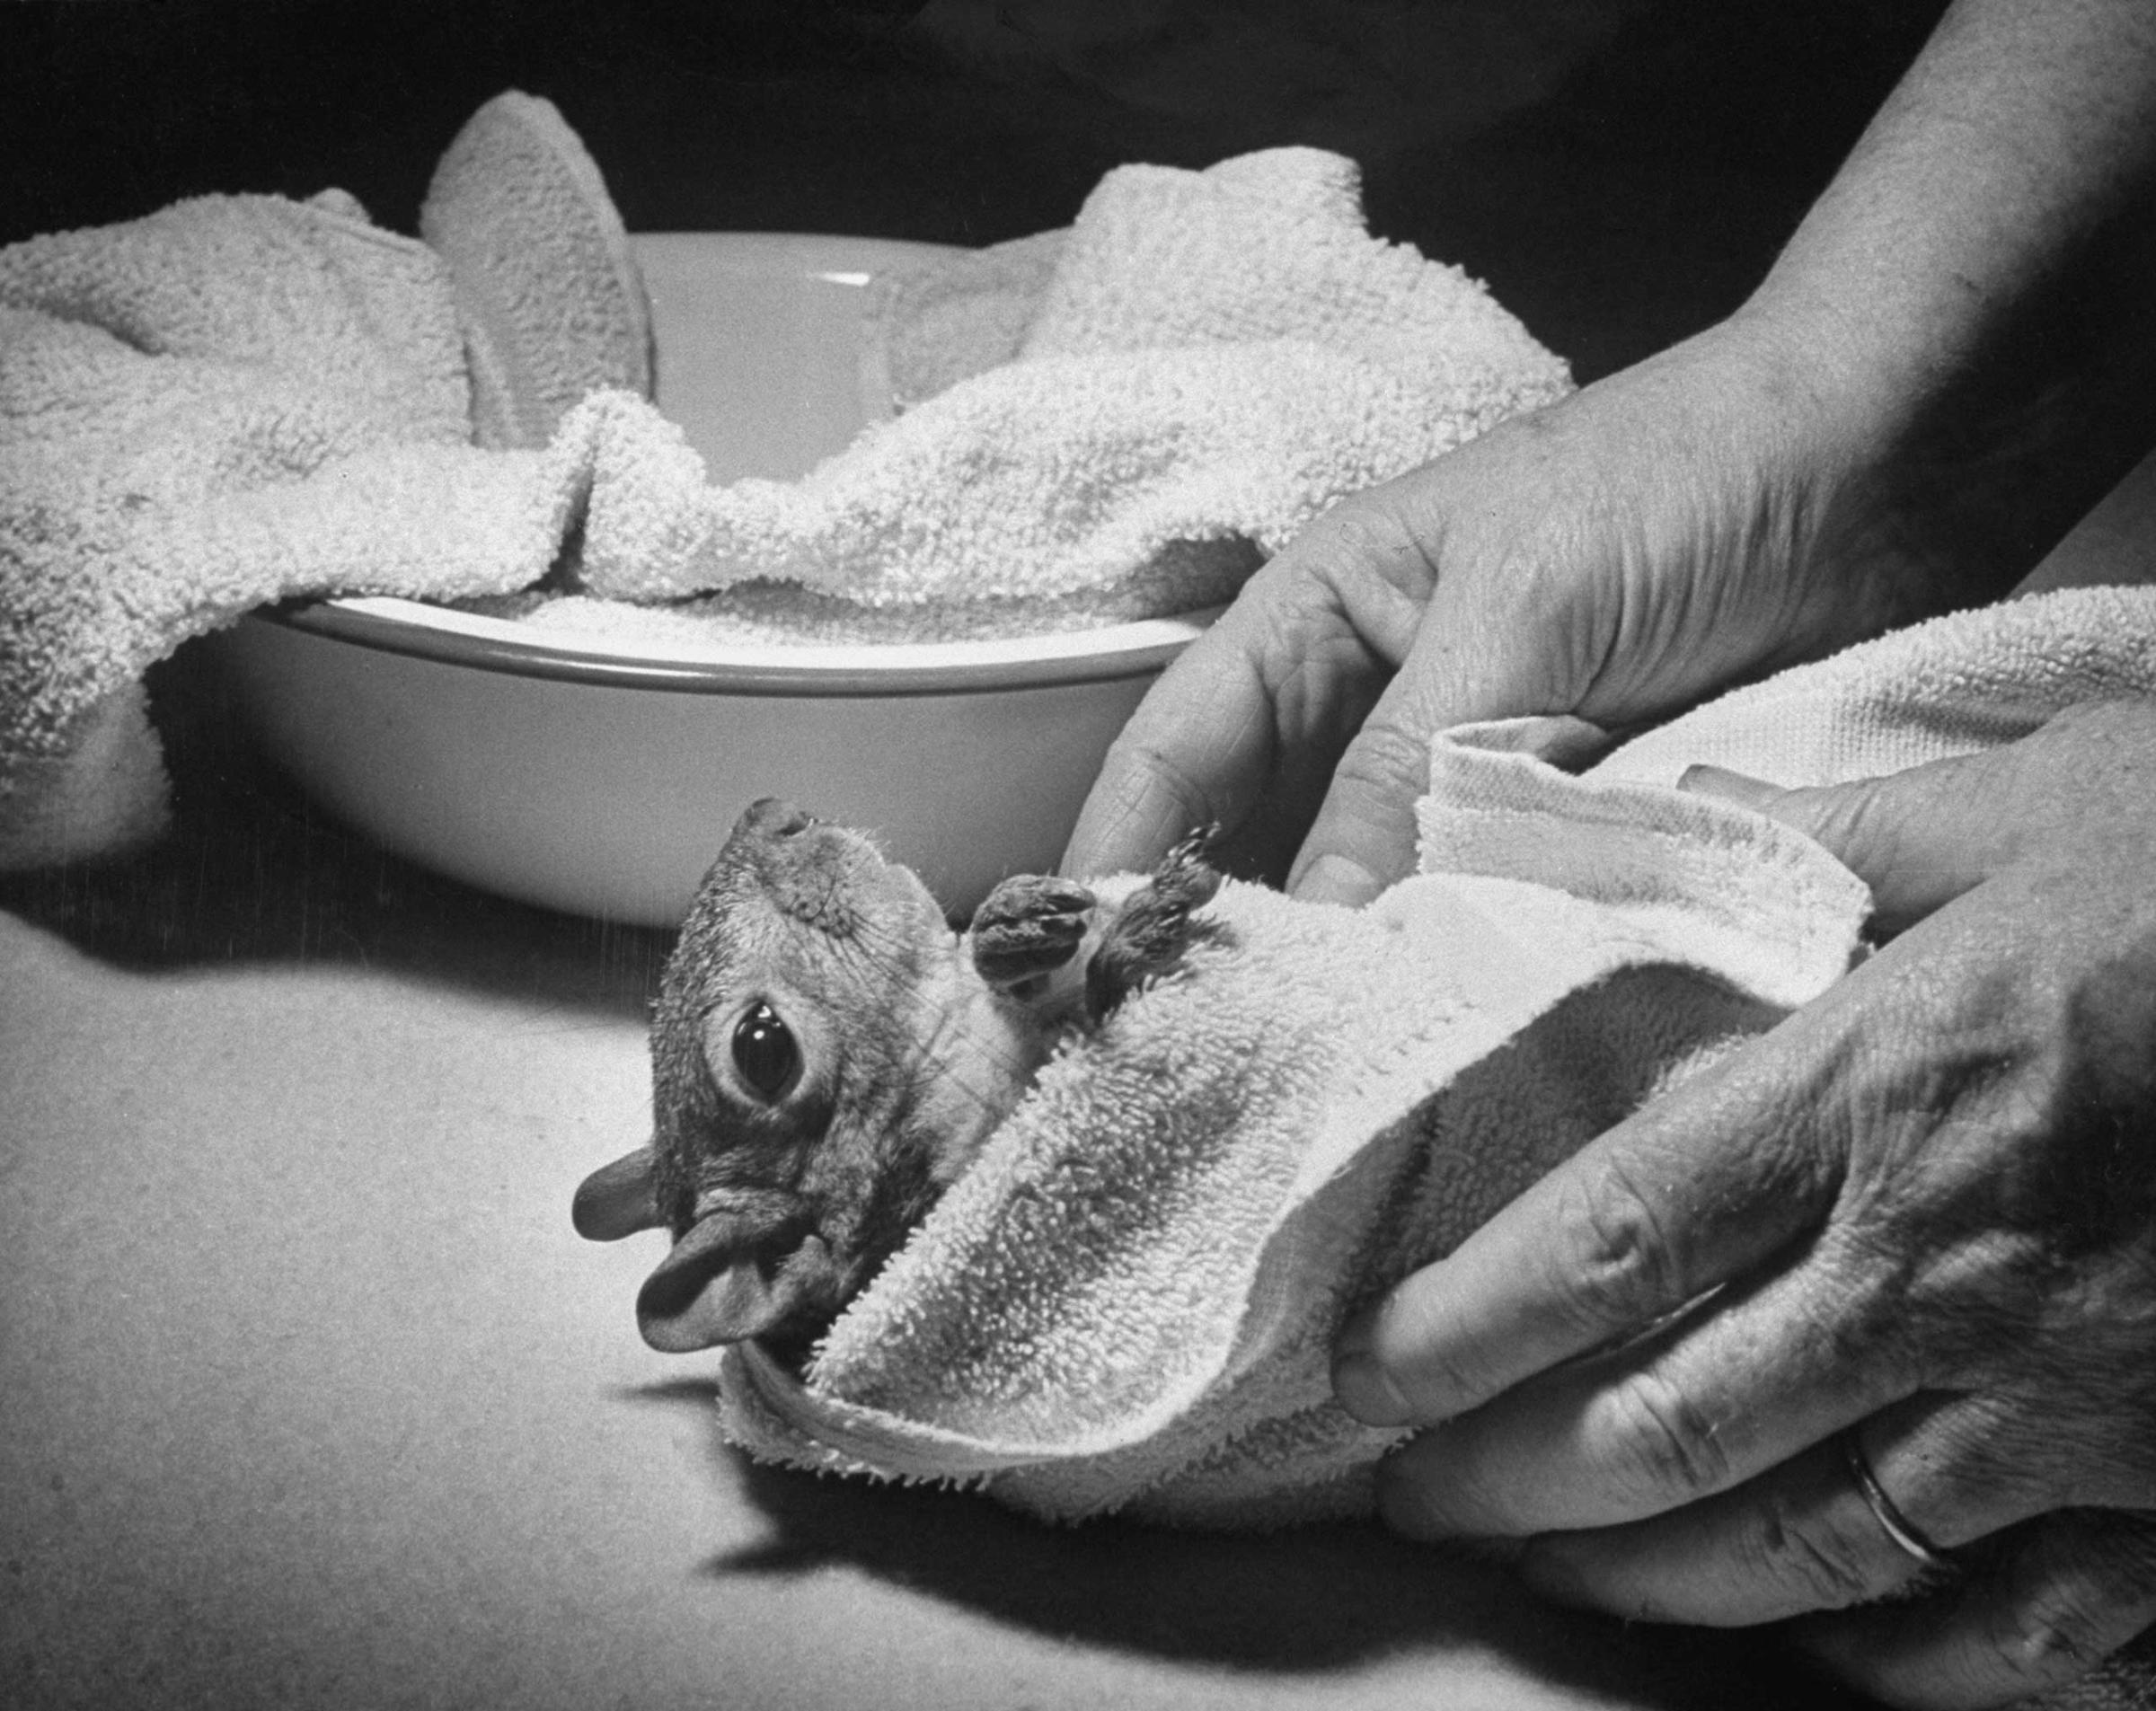 Tommy [Tucker, the squirrel] is dried after a bath. He seems to like being rubbed briskly. Although Tommy is neat about his own person, Mrs. Bullis [the woman who dressed him in clothes that she herself designed and made] has never been able to housebreak him.